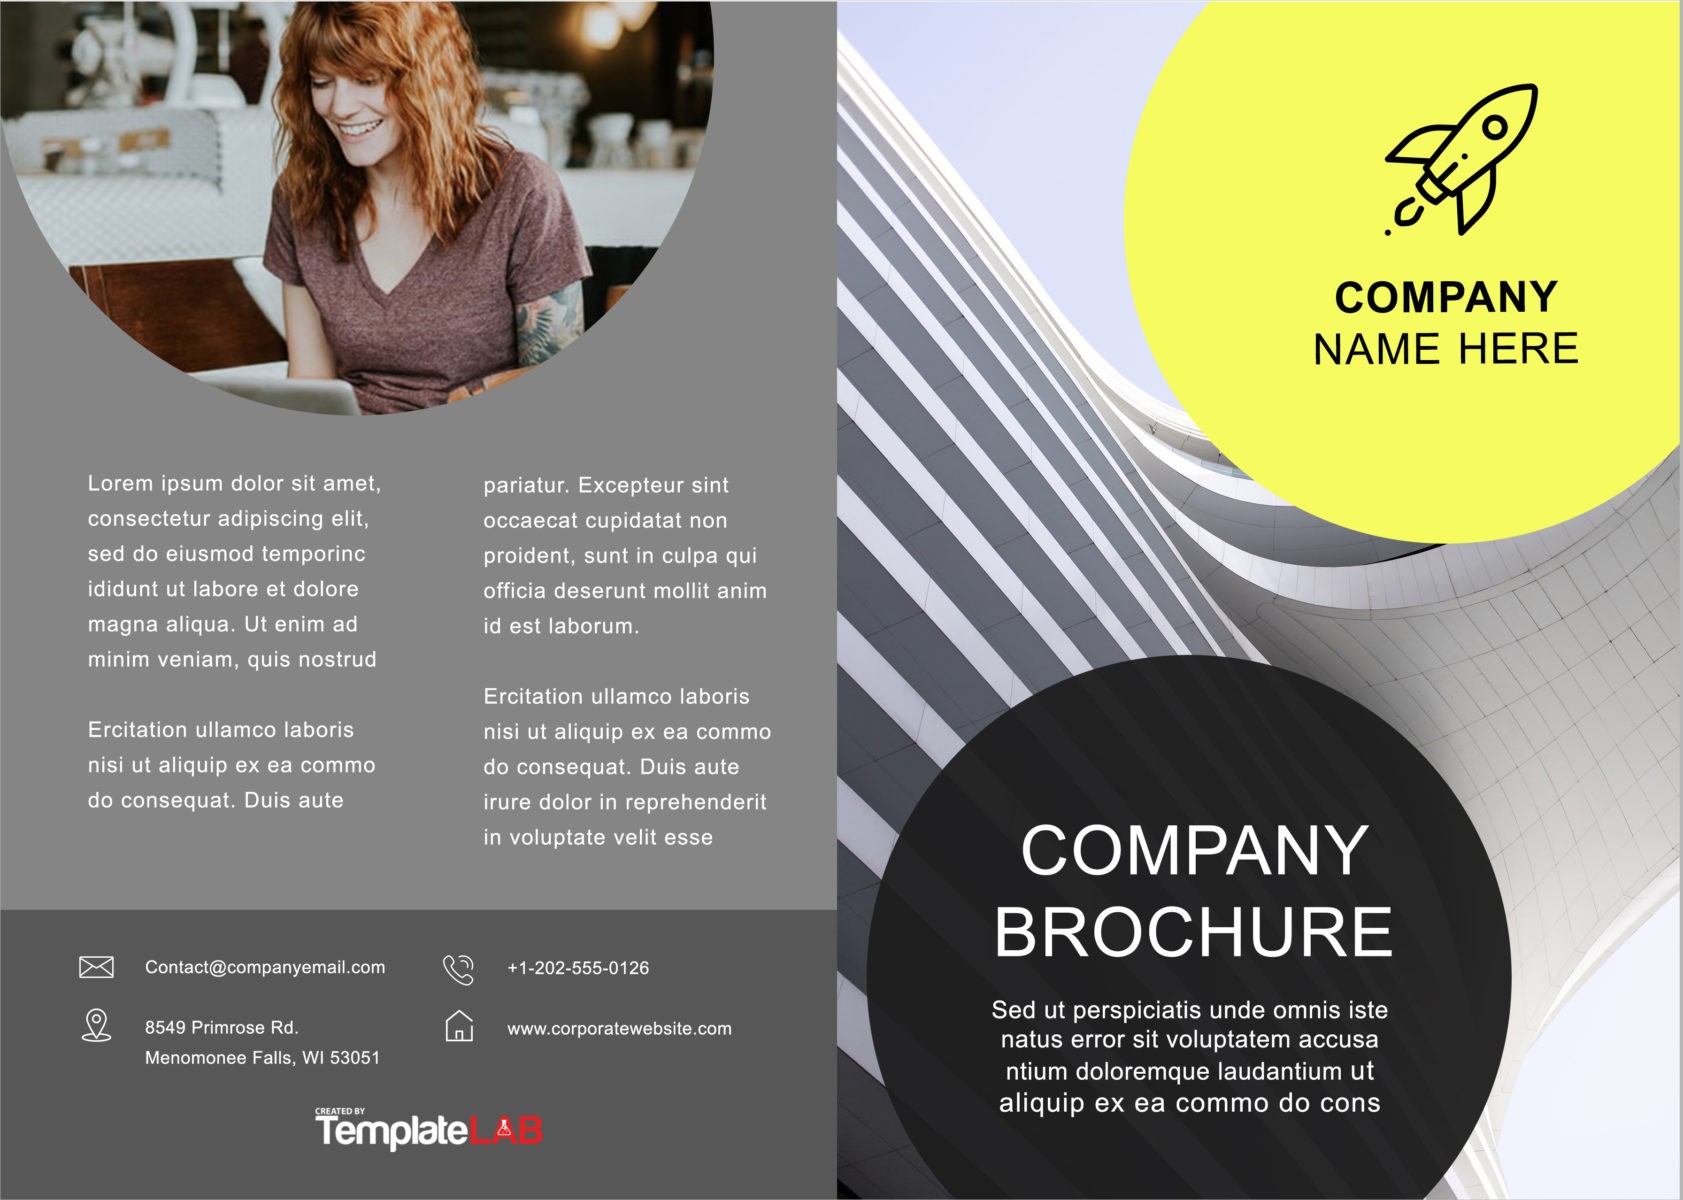 19 FREE Brochure Templates Word PowerPoint Photoshop 